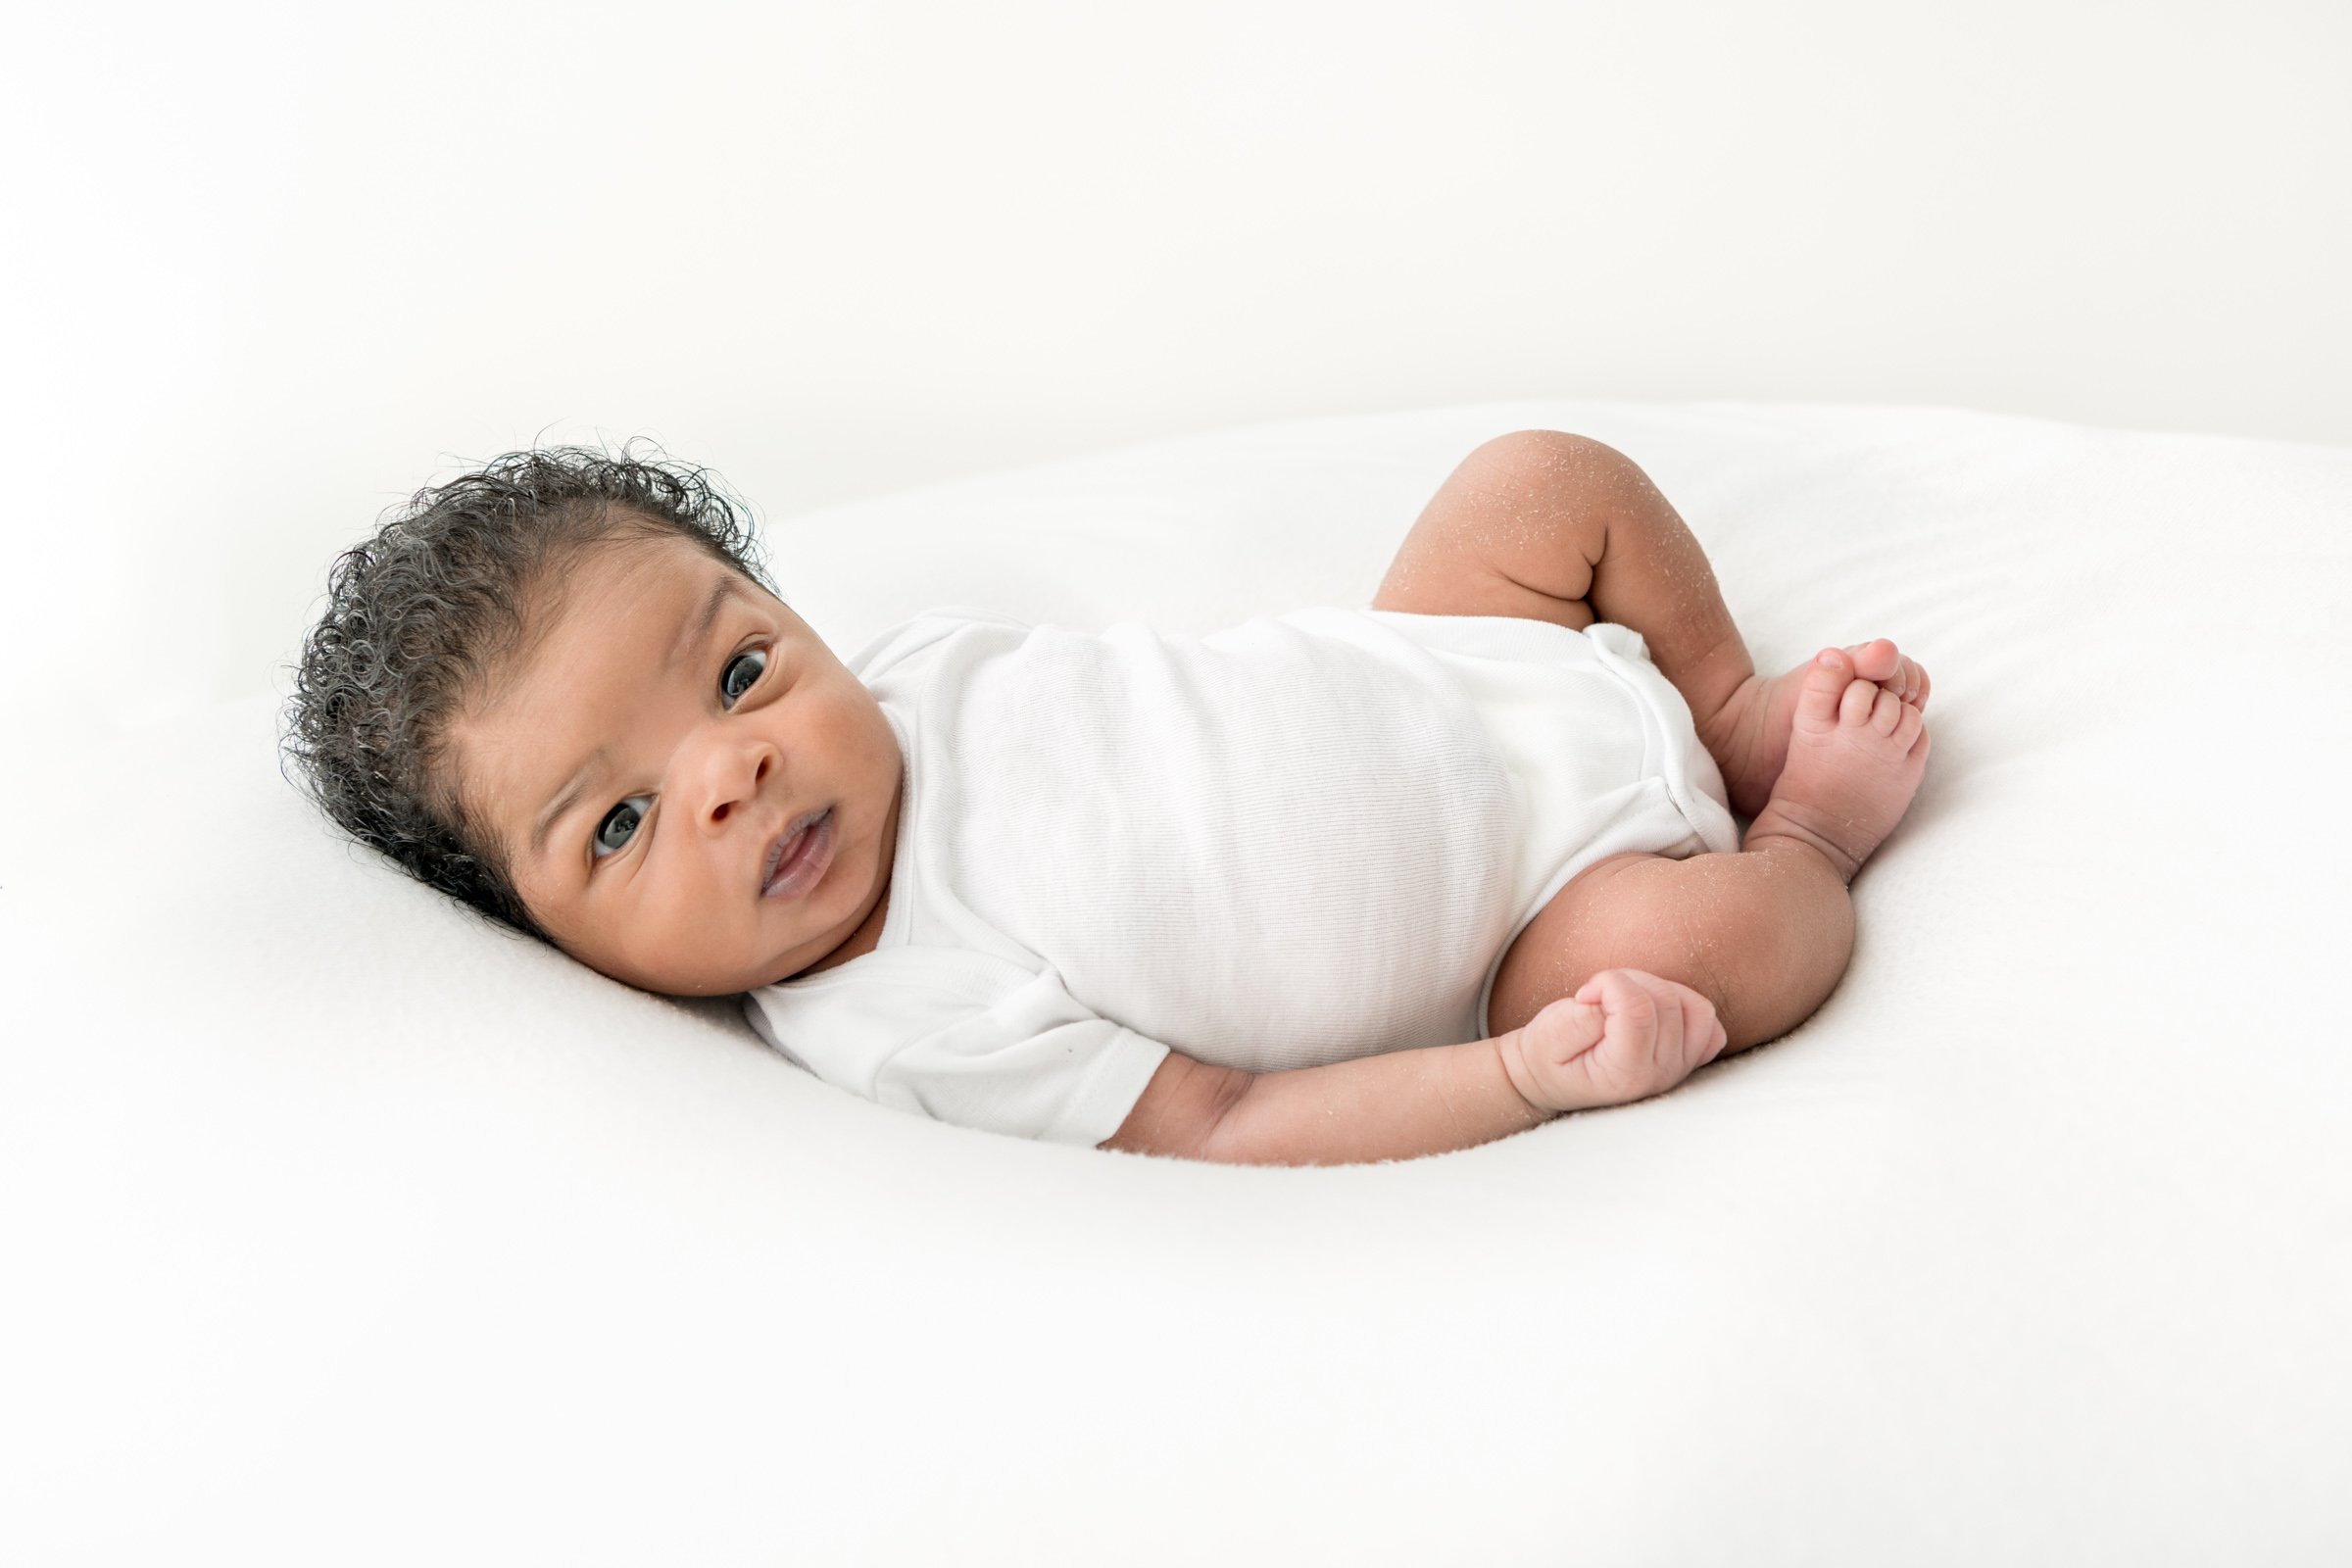  In an all-white studio in New Jersey, Nicole Hawkins Photography captures photography of a baby on a white pillow. all white studio sessions #nicolehawkinsphotography #NJbabyphotography #newbornportraits #NewJerseyStudioPhotography #newbornsession 